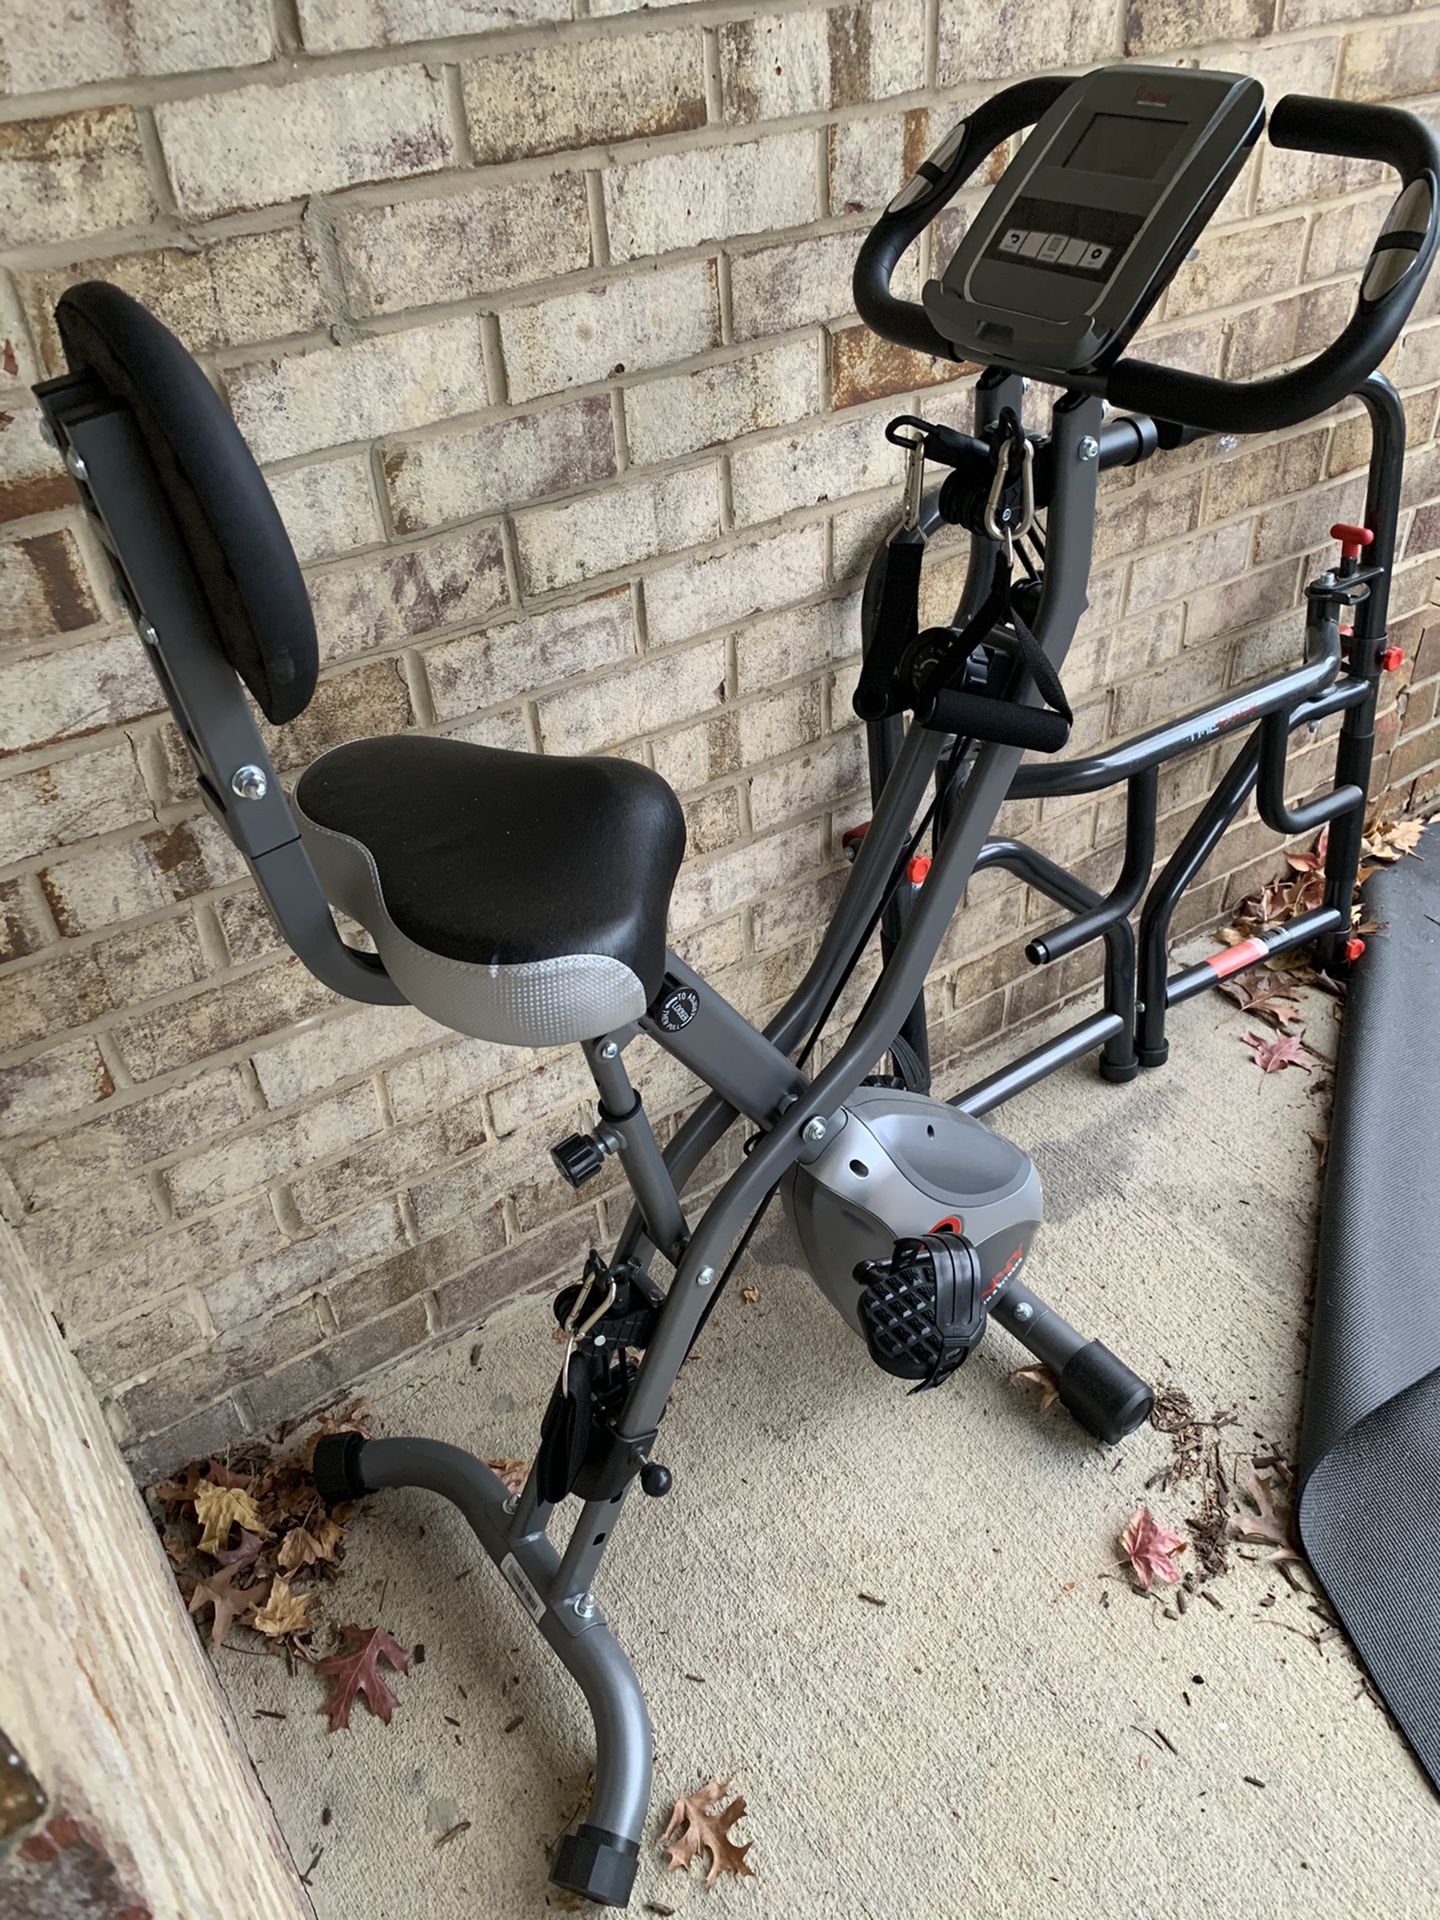 Indoor Cycling Bike with arm and leg resistance bands